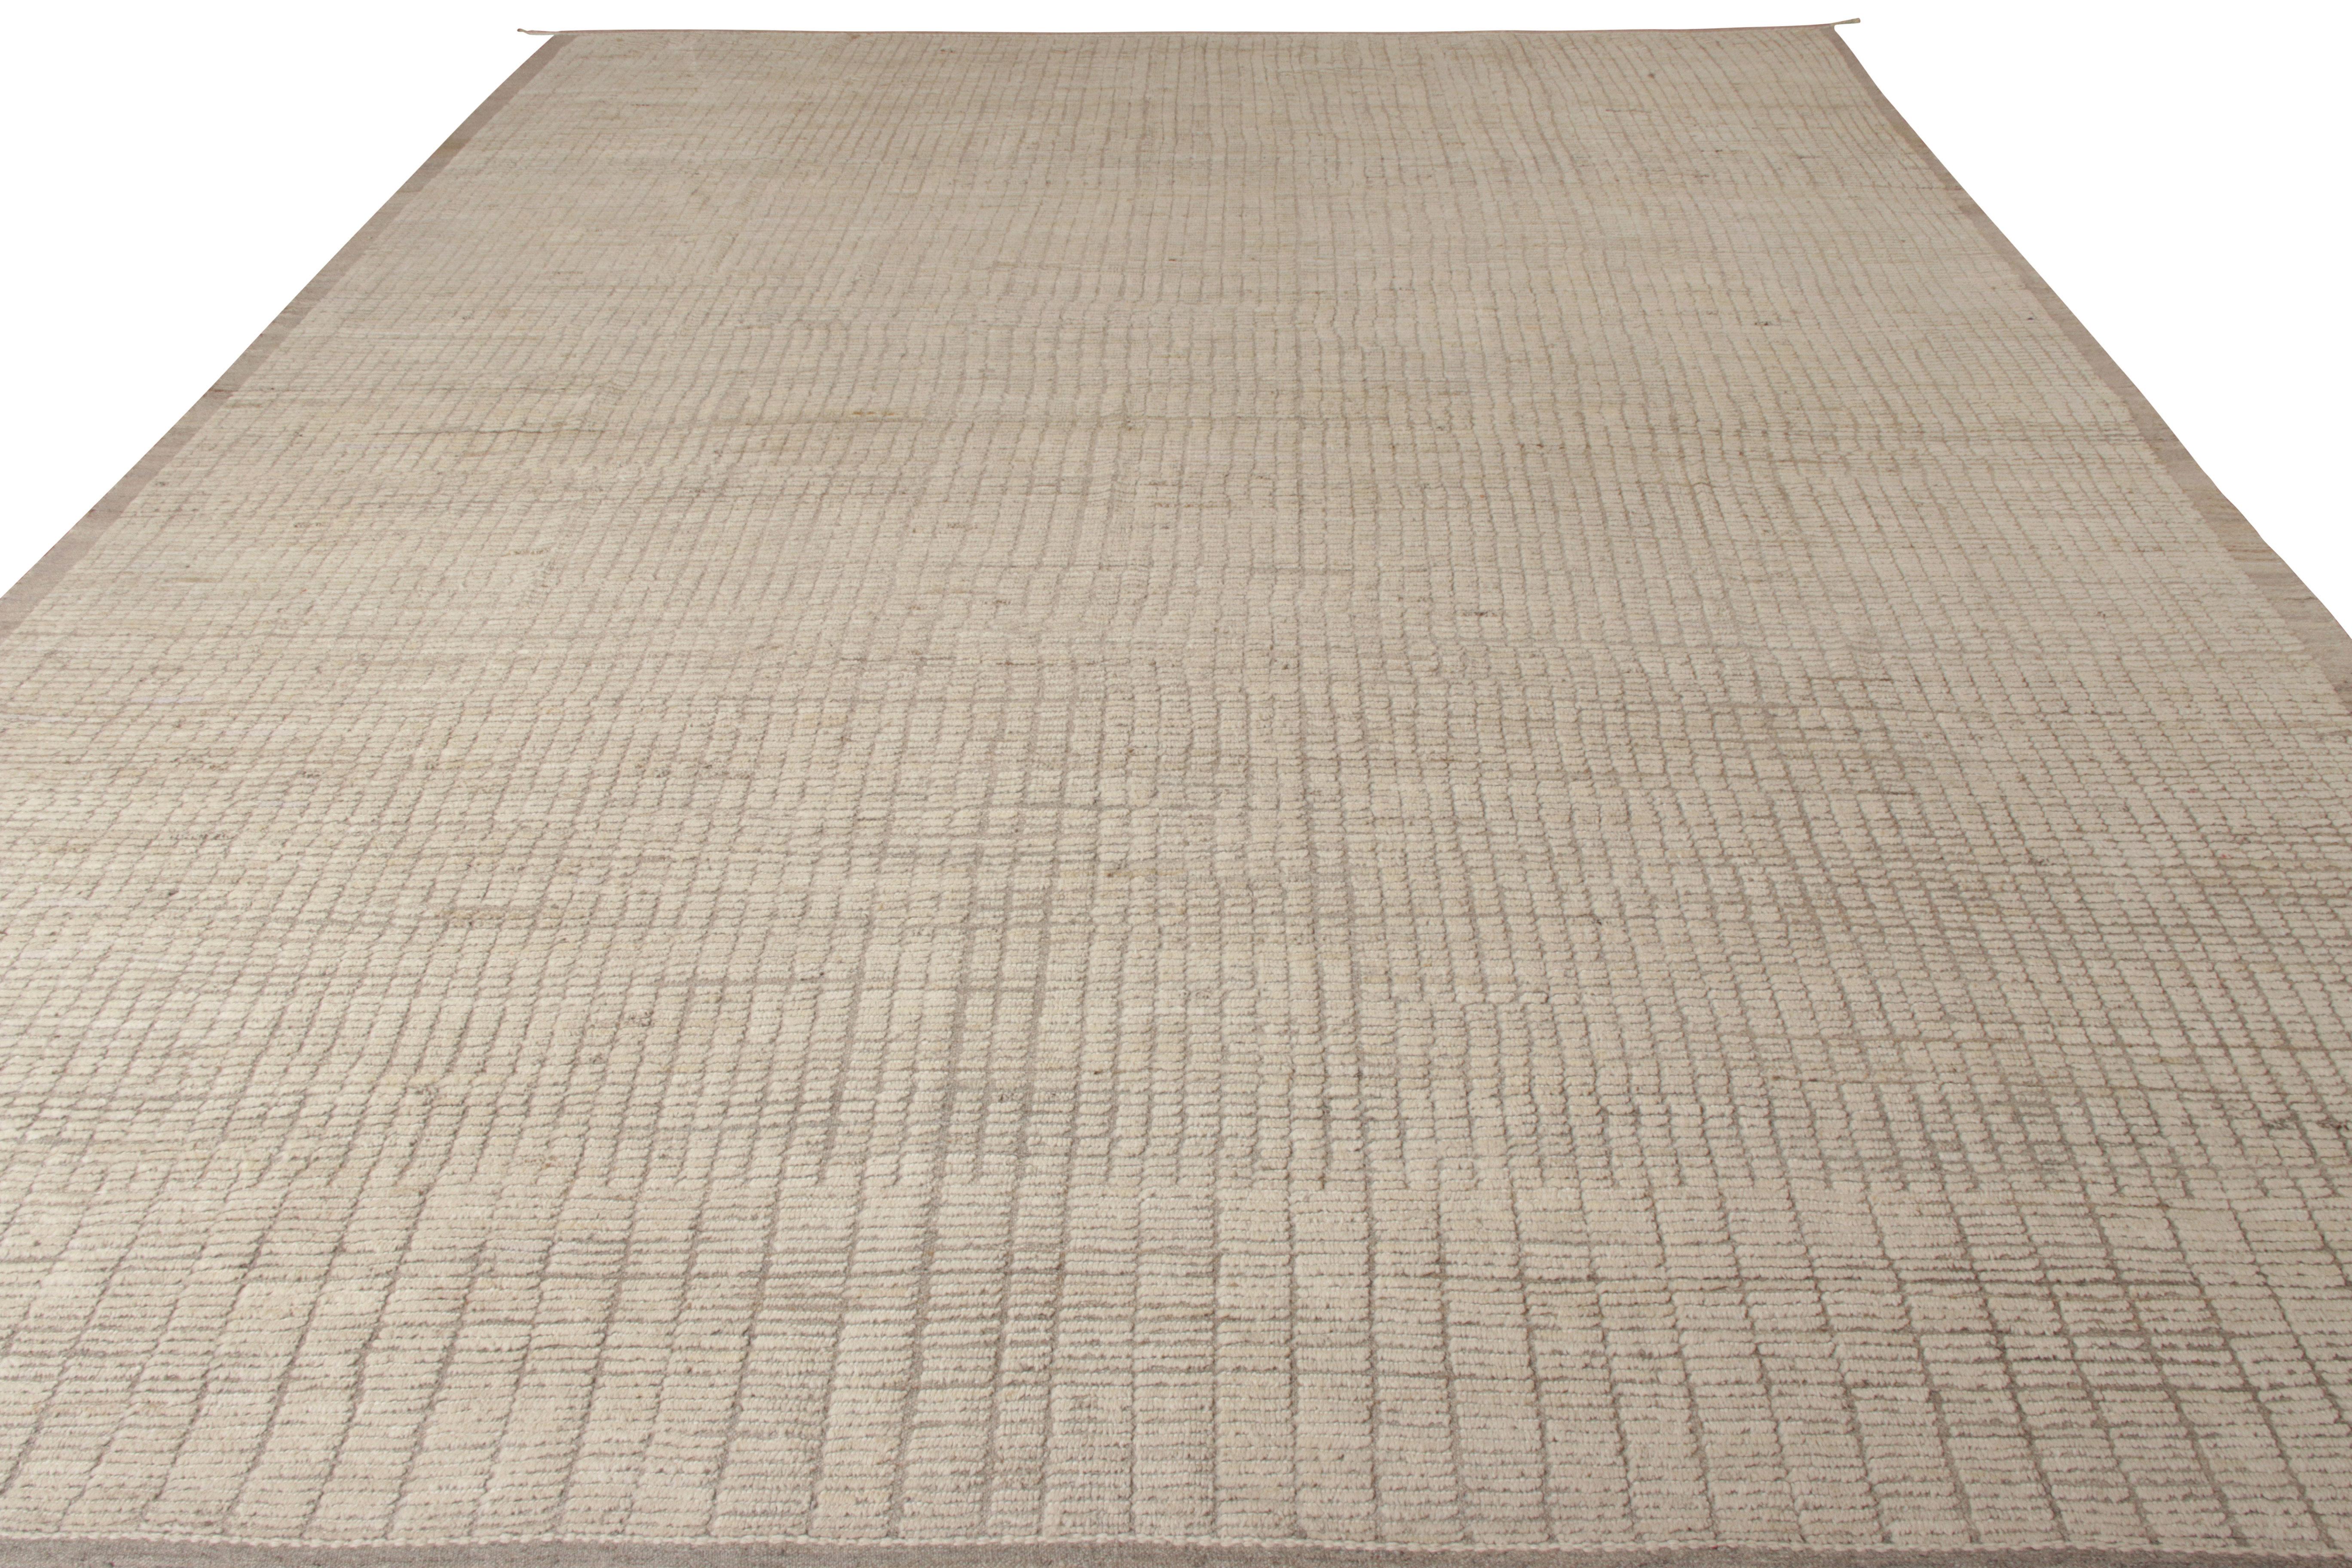 One of Rug & Kilim’s Moroccan style masterpieces, this 13x16 handmade portrait marries a unique gradiance of high-low texture with a comforting white and beige-brown colorway for a whole new kind of neutral and seamless symmetry across the scale. A